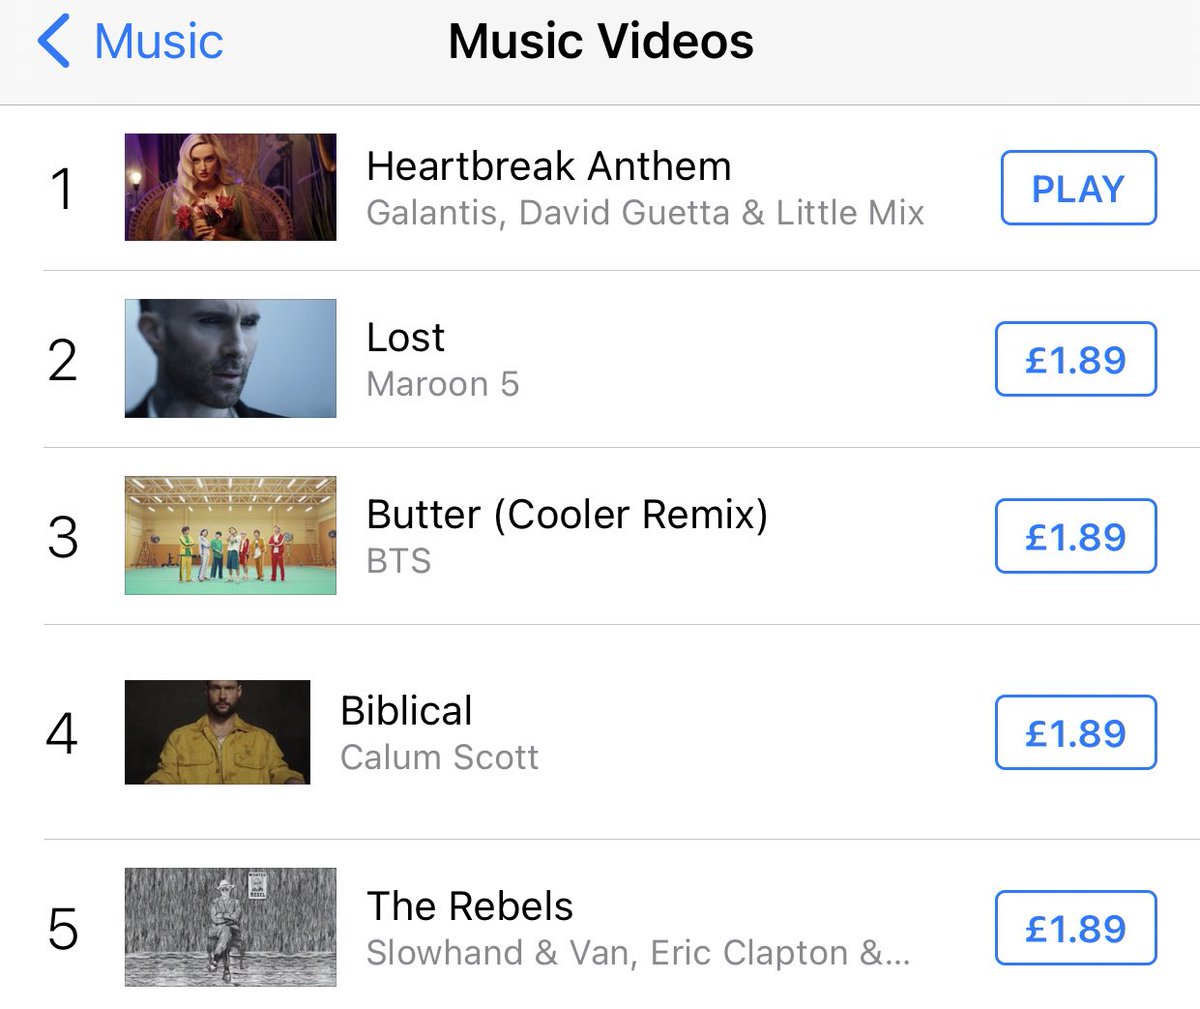 Heartbreak Anthem music video is currently No.1 on UK iTunes & the song is still in the Top 5 at No.3! @LittleMix music.apple.com/gb/music-video…